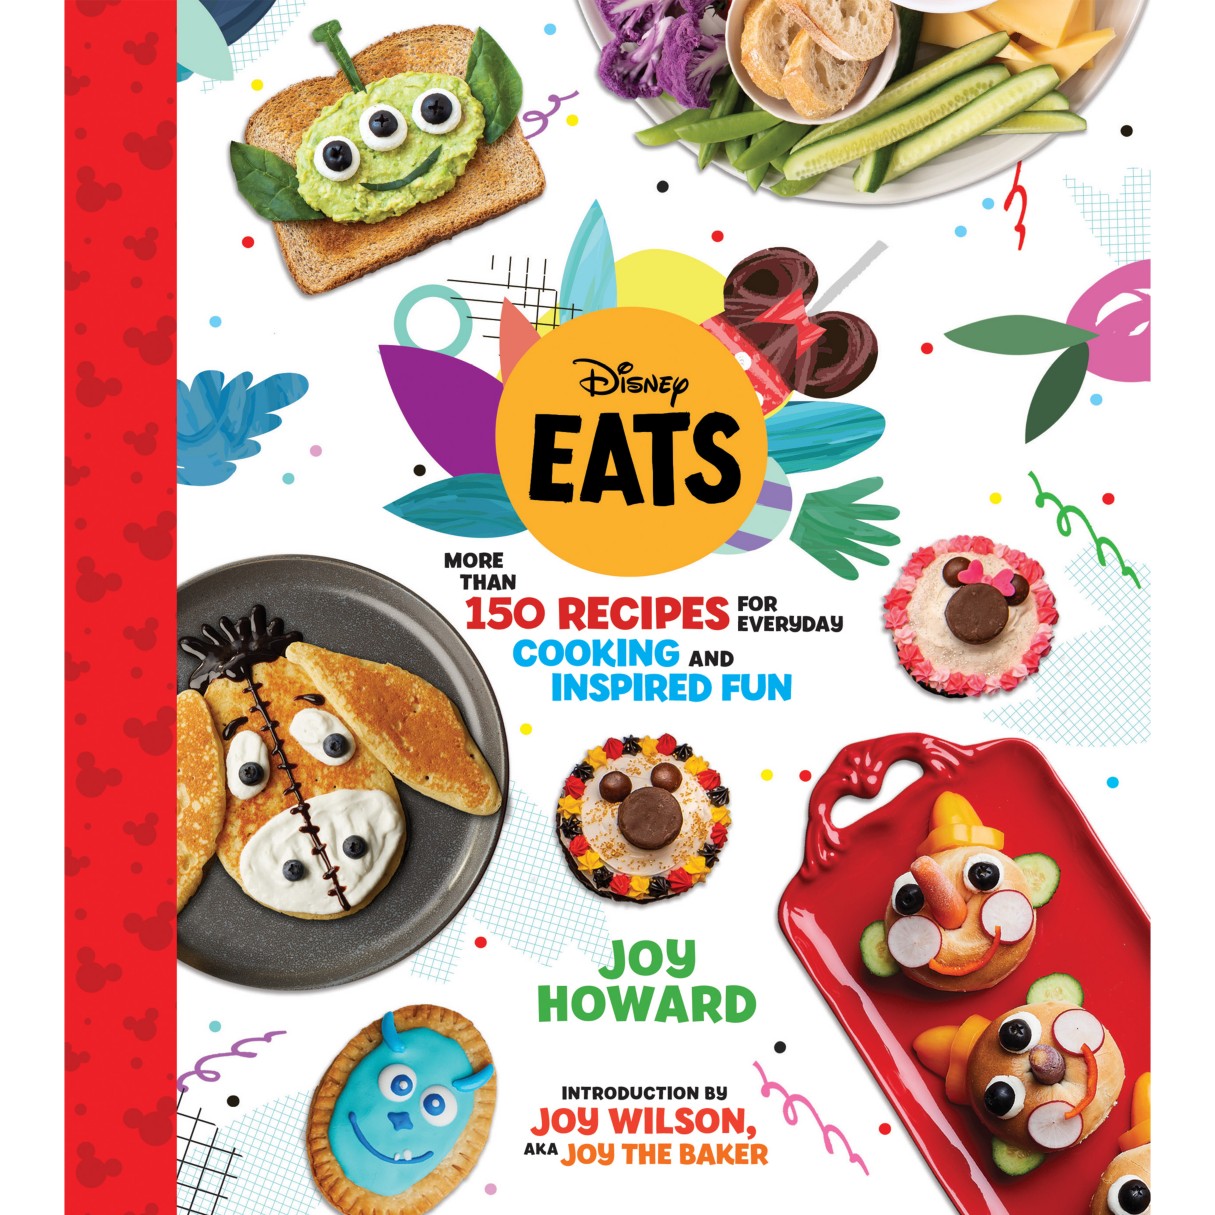 Disney Eats: More Than 150 Recipes for Everyday Cooking and Inspired Fun Book